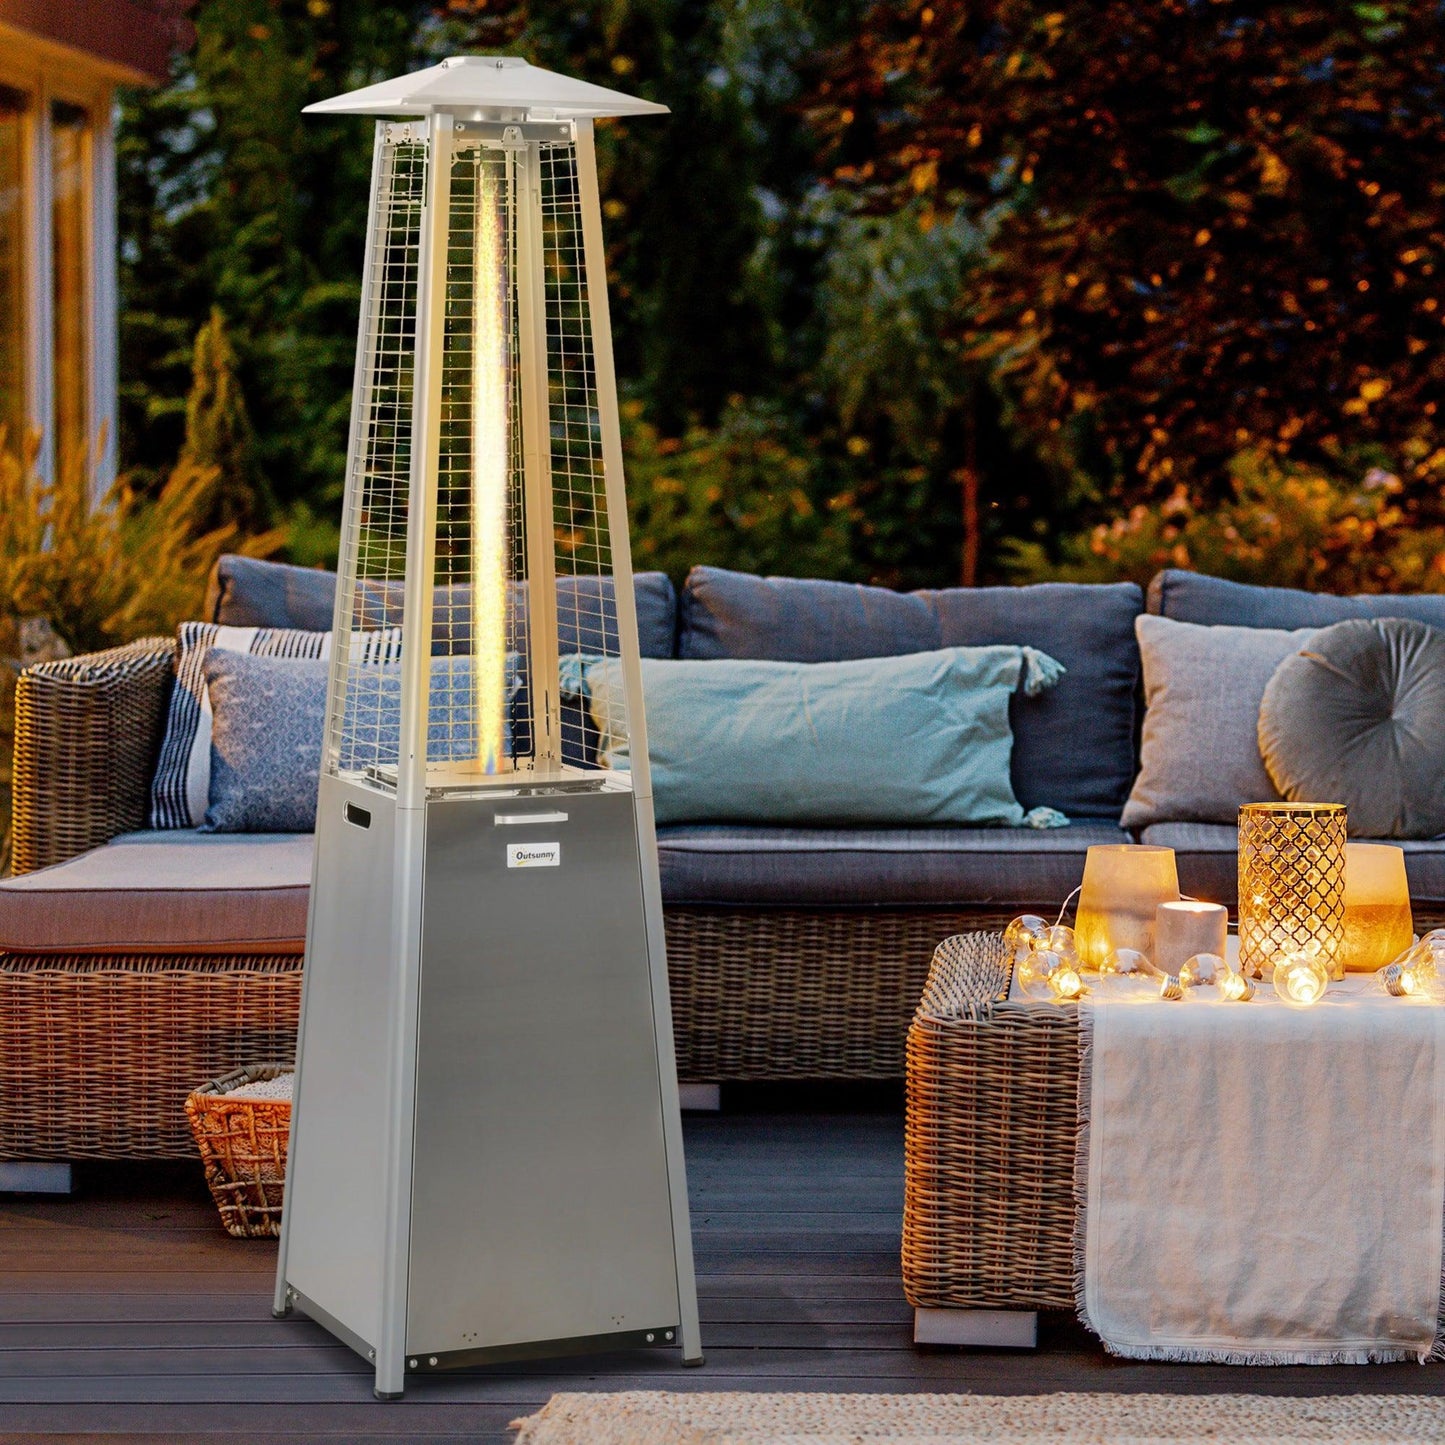 Outsunny Patio Gas Heater with Wheels - 11.2KW - ALL4U RETAILER LTD